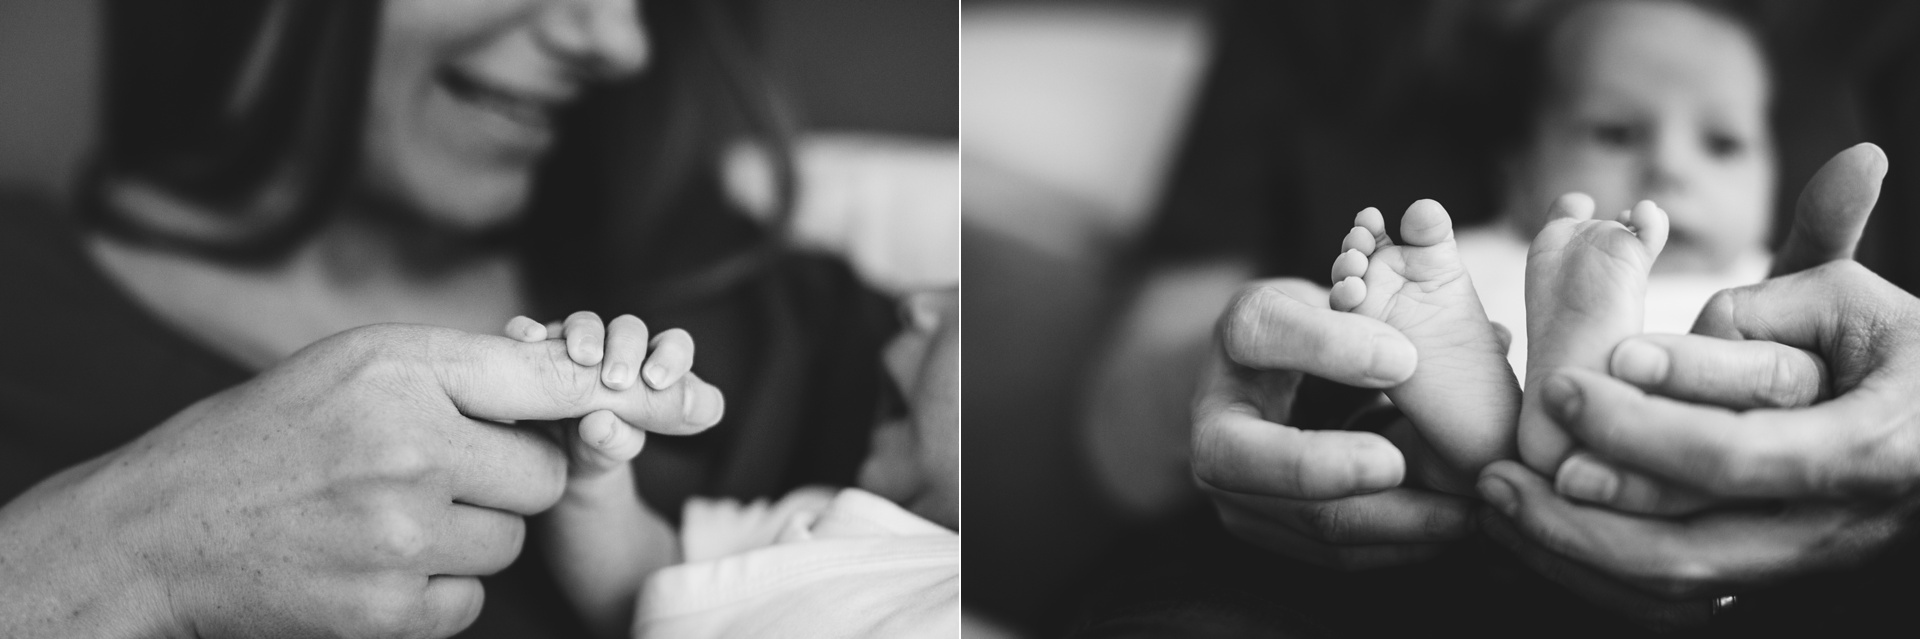 Close up images of baby's hands and feet